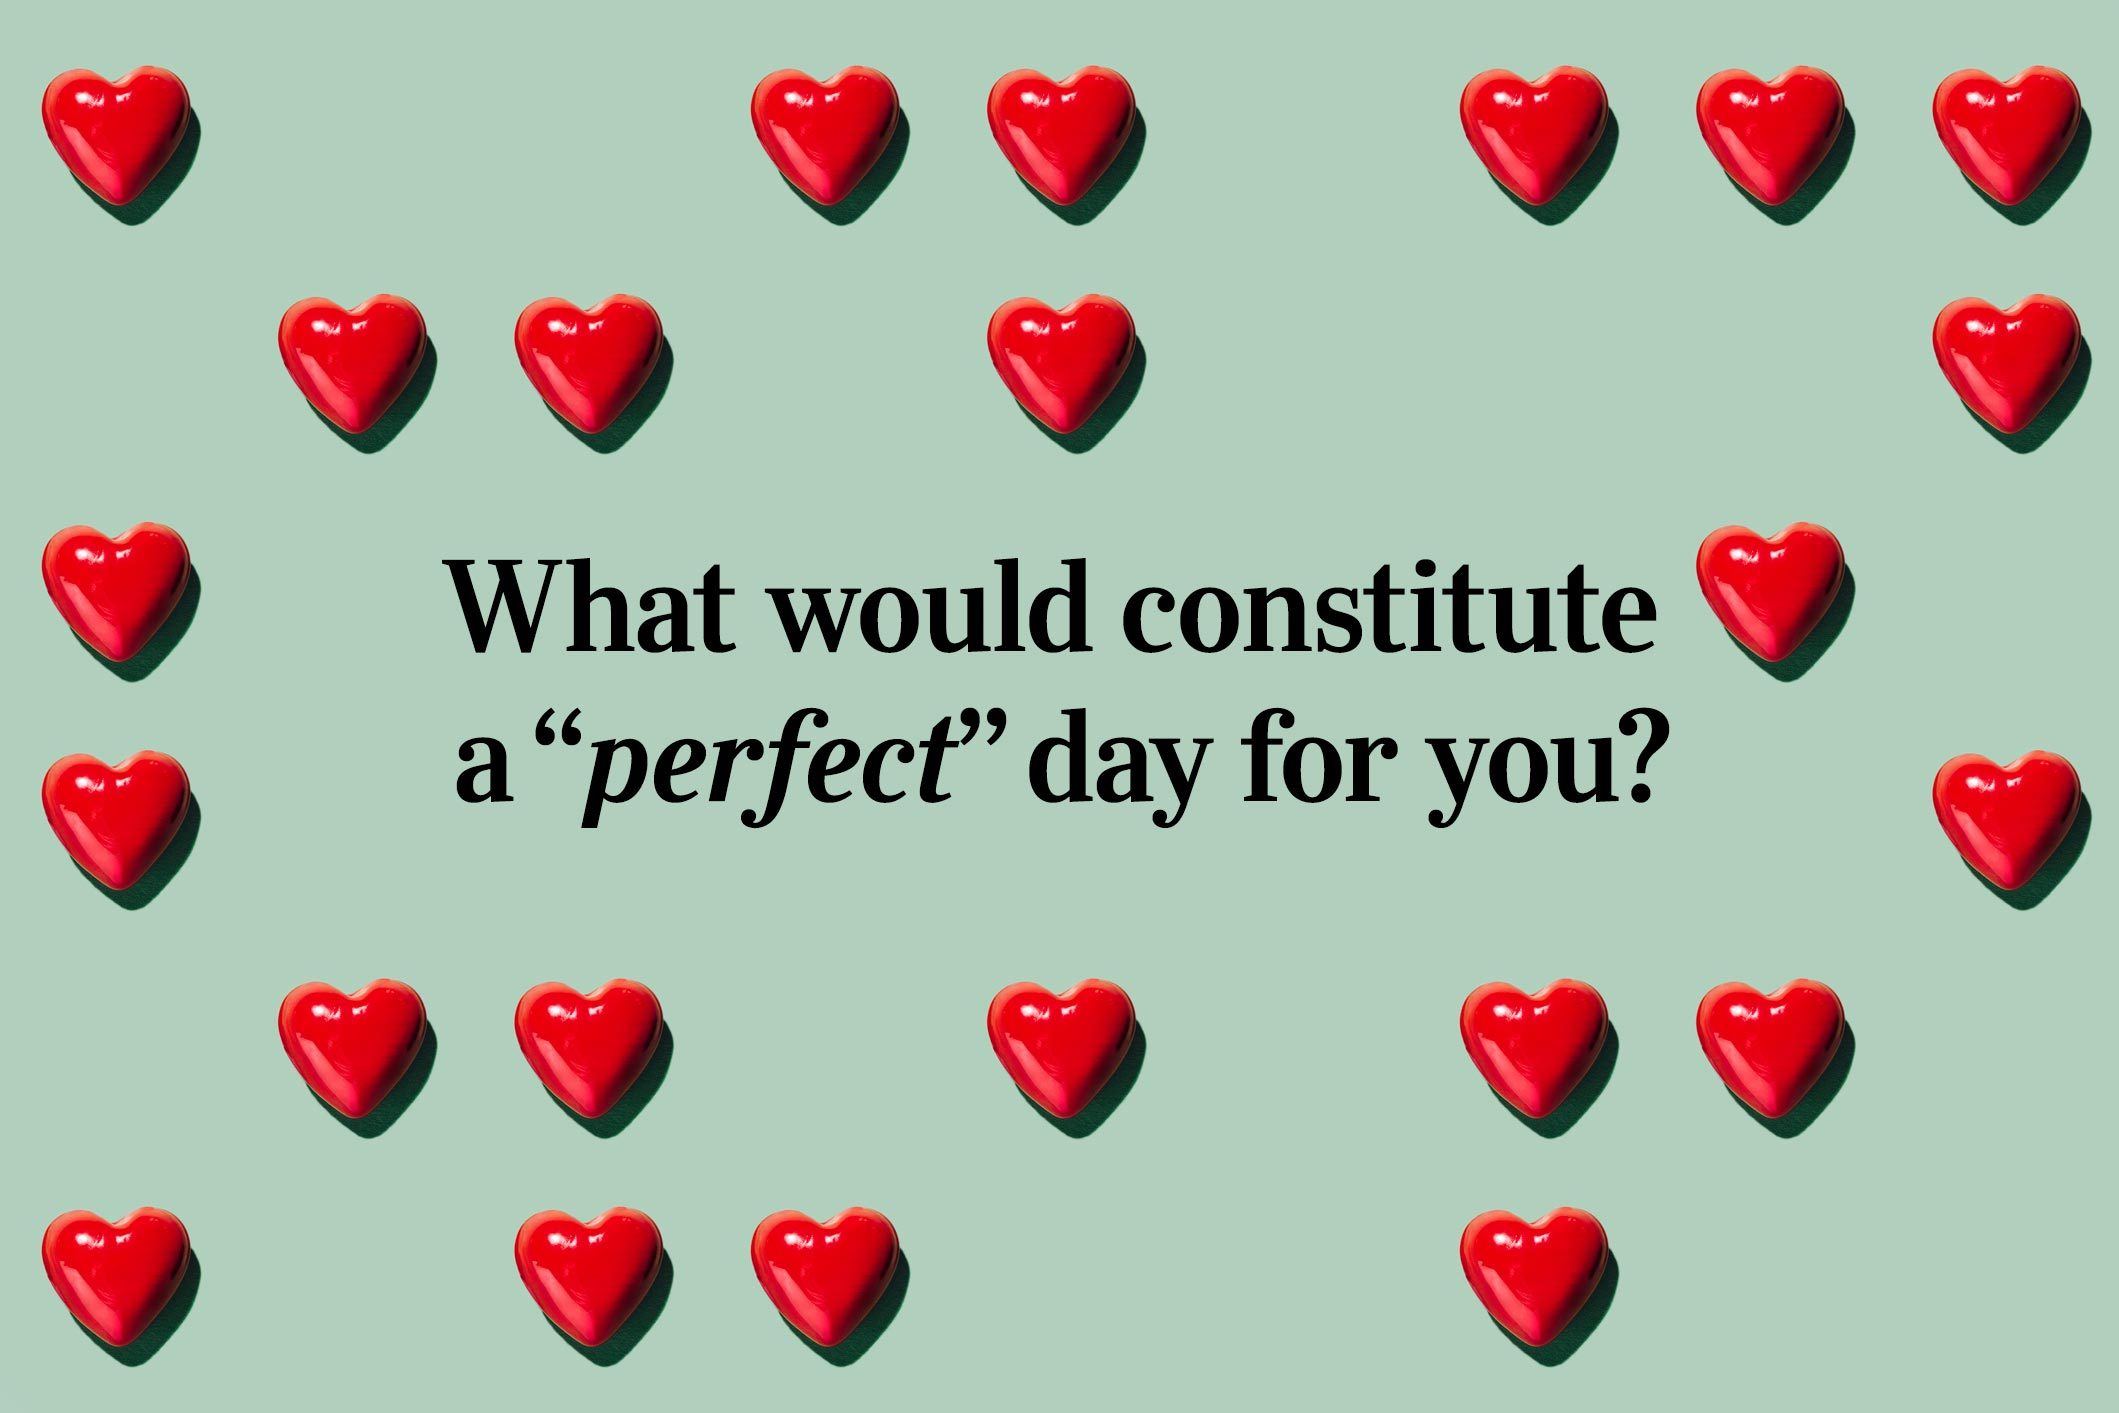 <p>What would constitute a “perfect” day for you?</p> <p>Don't be surprised if it concludes by streaming a fun <a href="https://www.rd.com/list/romantic-comedy-movies/" rel="noopener">romantic comedy</a> and snuggling on the couch.</p>